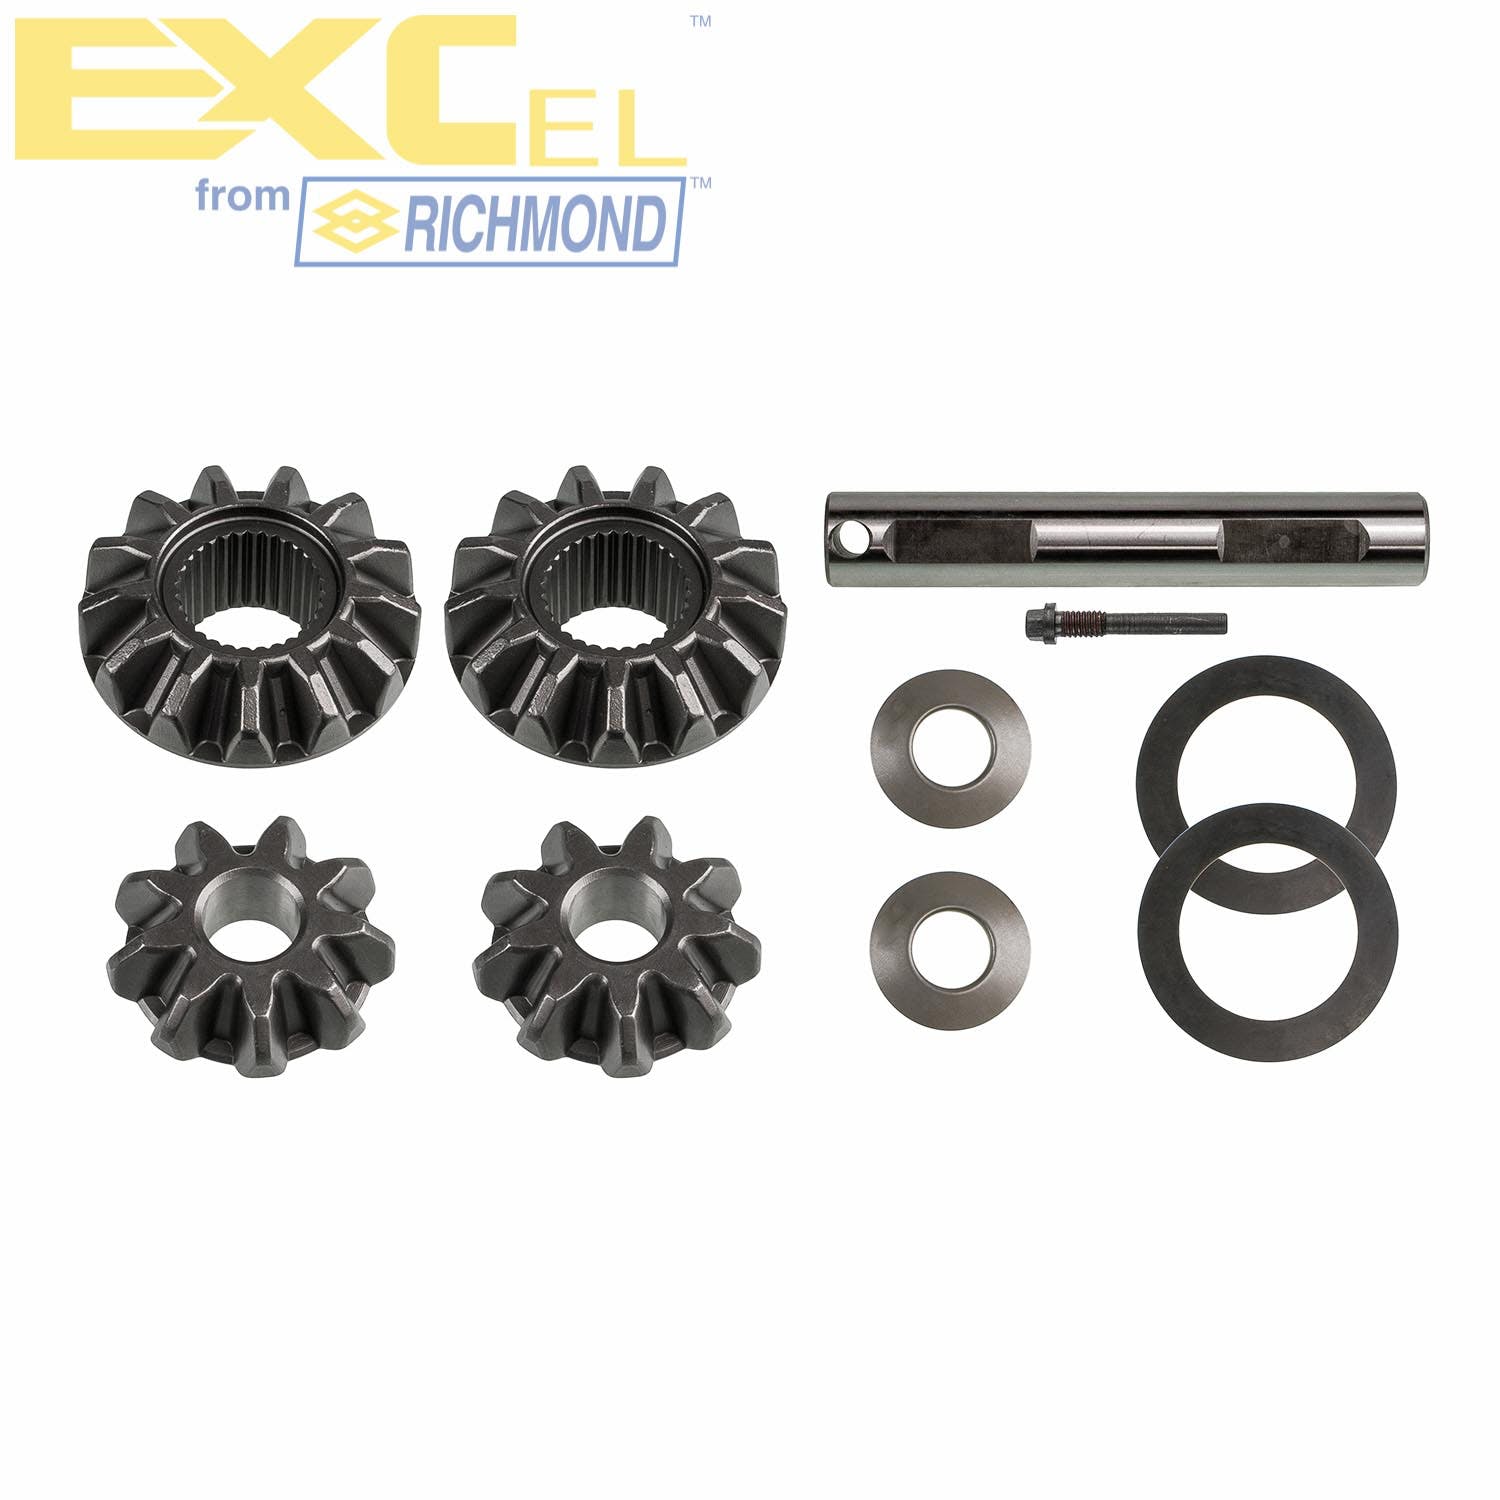 Excel XL-4056 Differential Carrier Gear Kit